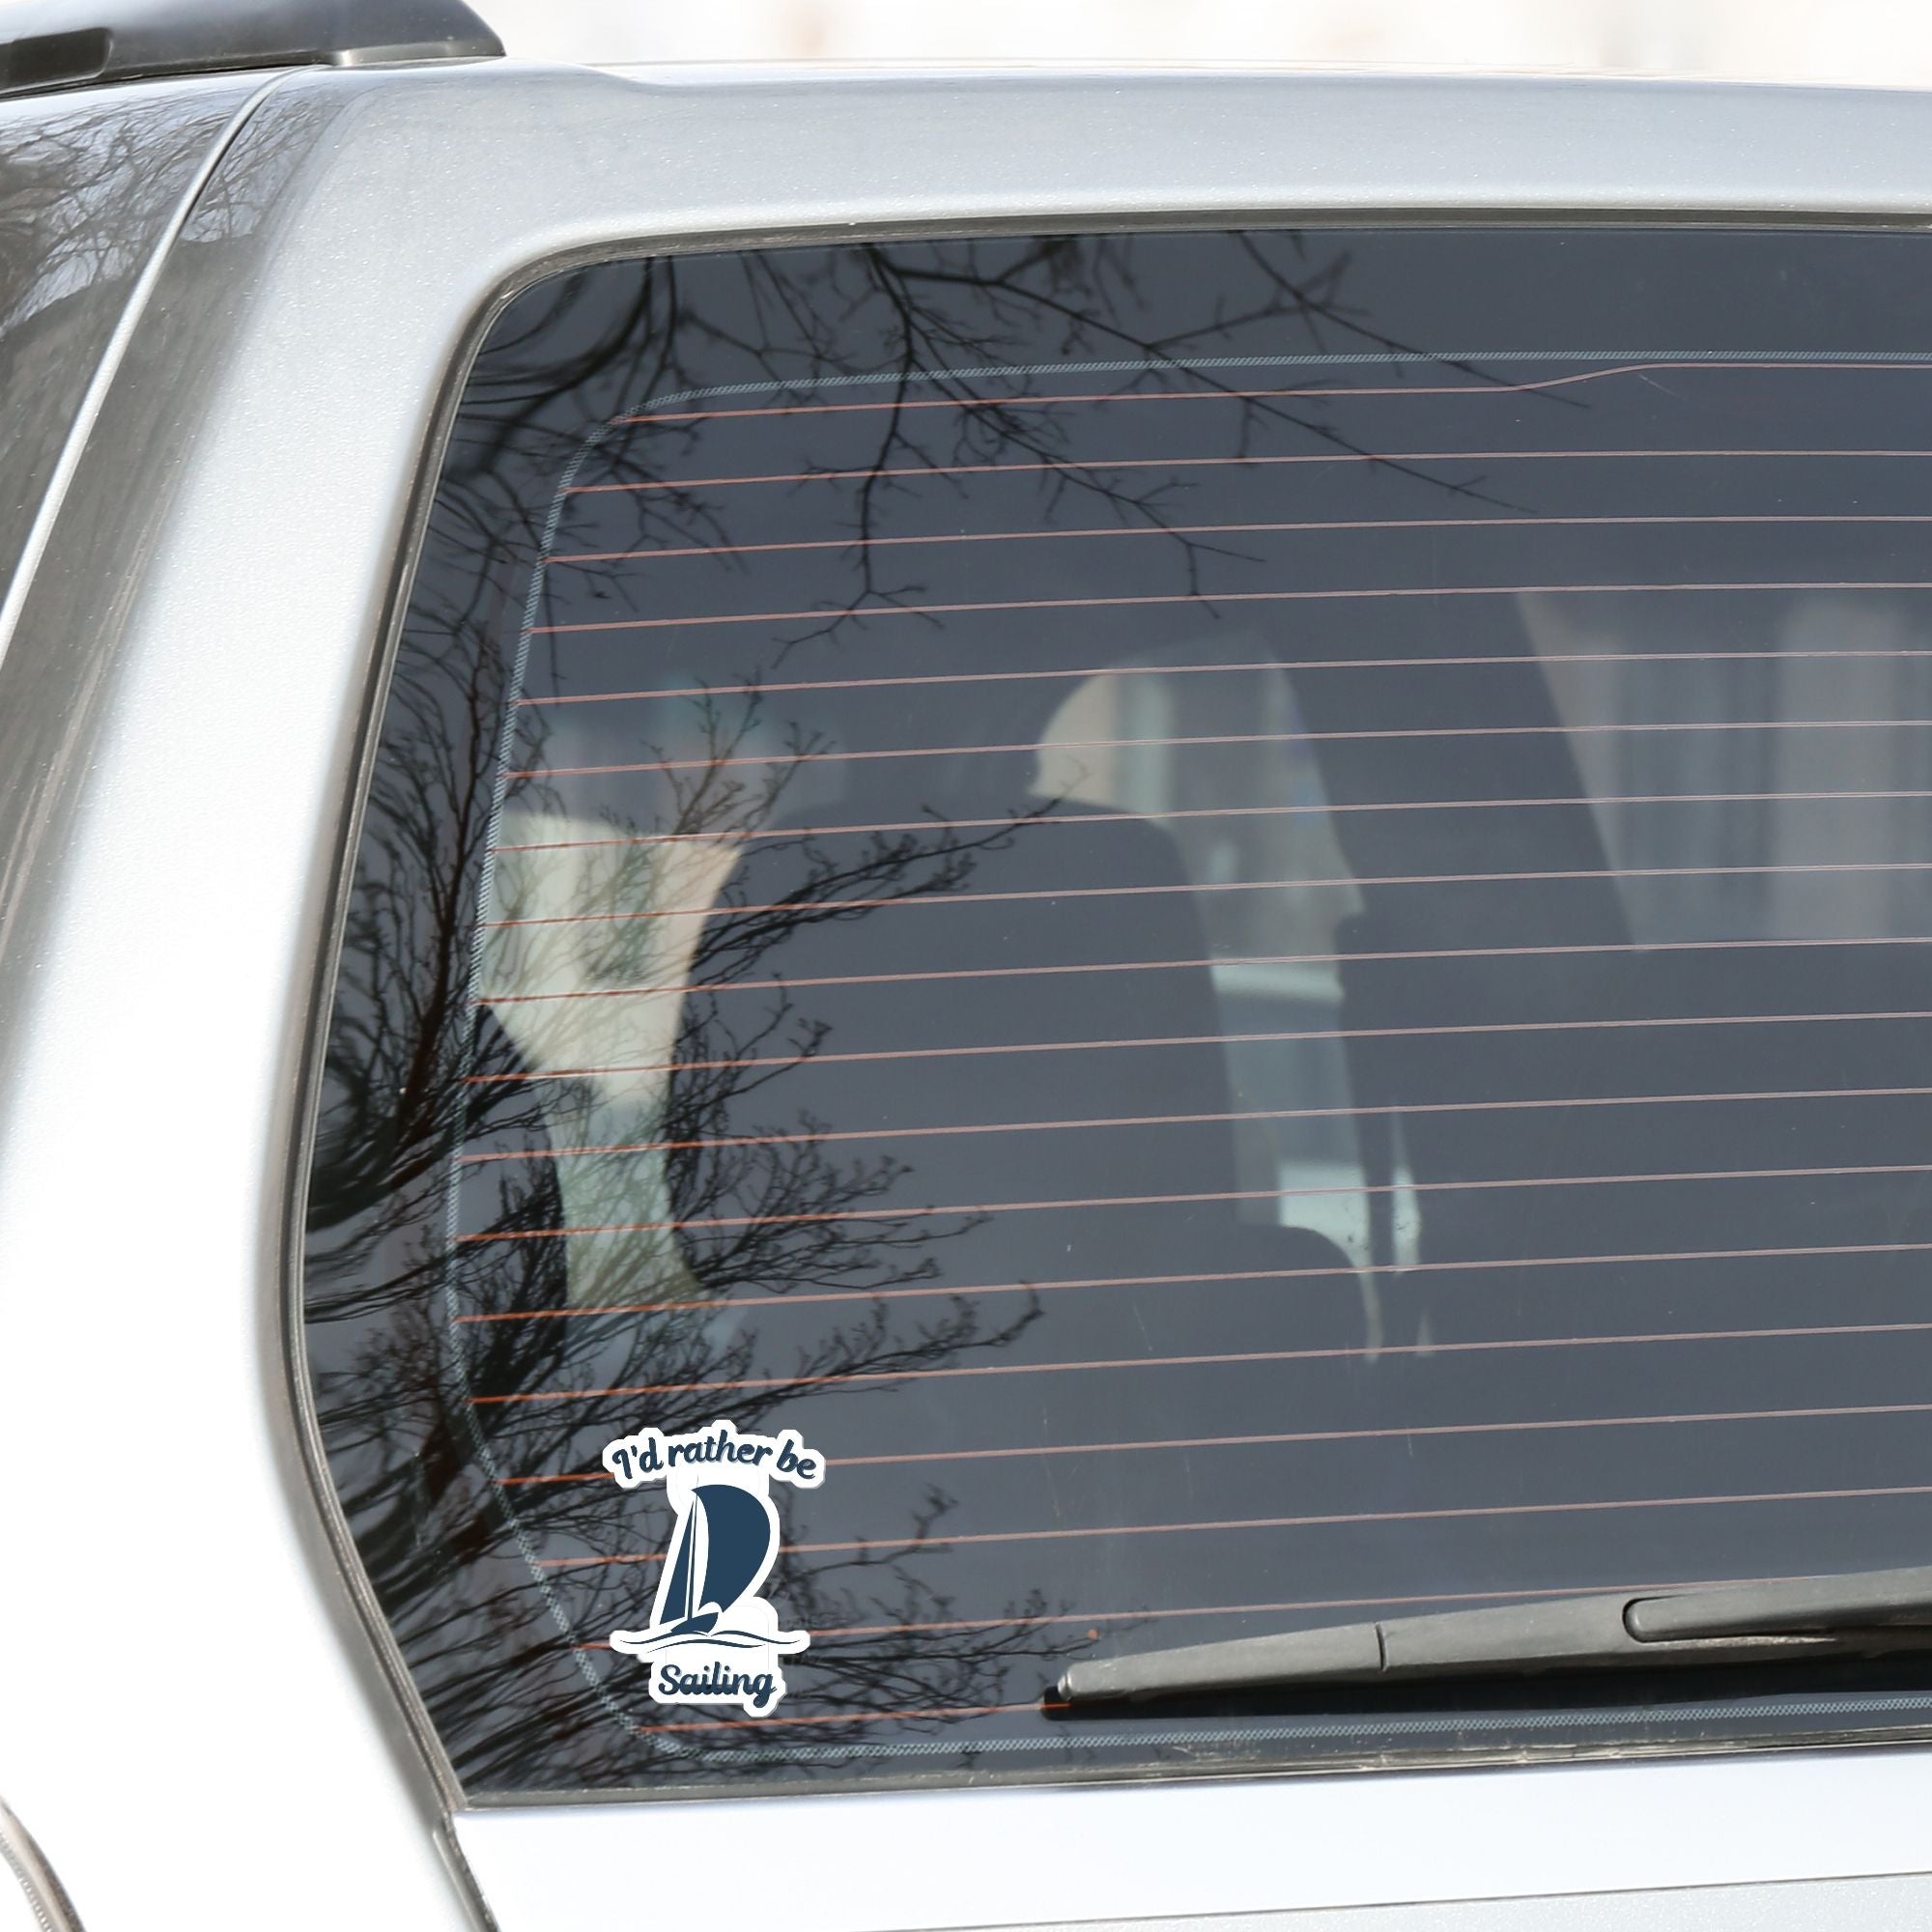 This individual die-cut sticker is great for anyone who loves to sail! It features a blue sailboat with the words "I'd rather be Sailing". This sailing sticker is understated, but says a lot! This image shows the I'd rather be Sailing die-cut sticker on the back window of a car.